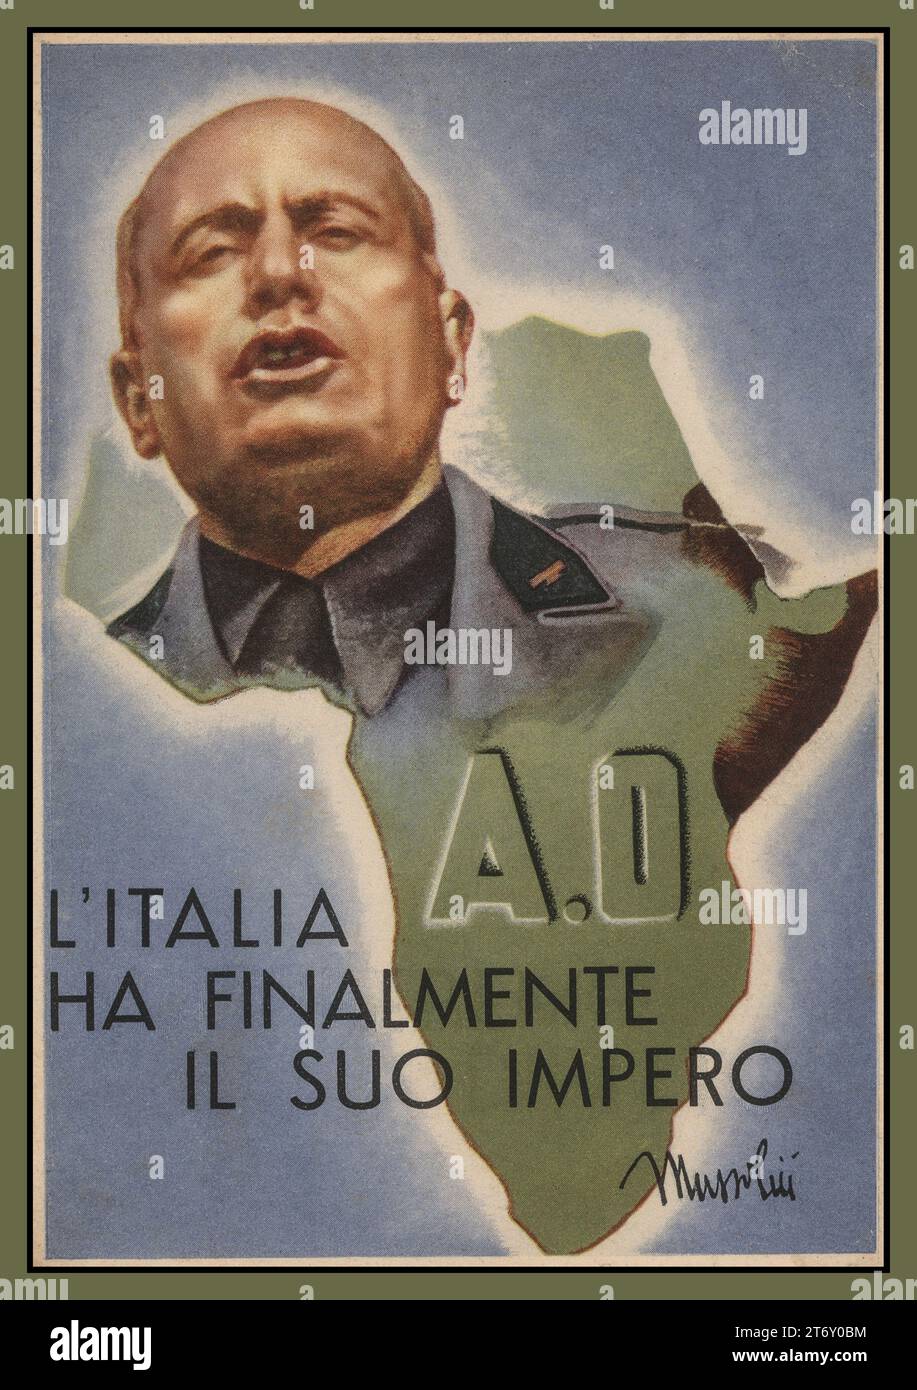 MUSSOLINI Benito Amilcare Andrea Mussolini overlaid on map of Italy, with the caption  ' Italy finally has its empire' Vintage Poster Propaganda card. Mussolini was an Italian dictator and journalist who founded and led the National Fascist Party. He led Italy in to World War II and was executed by Italian partisans. Stock Photo